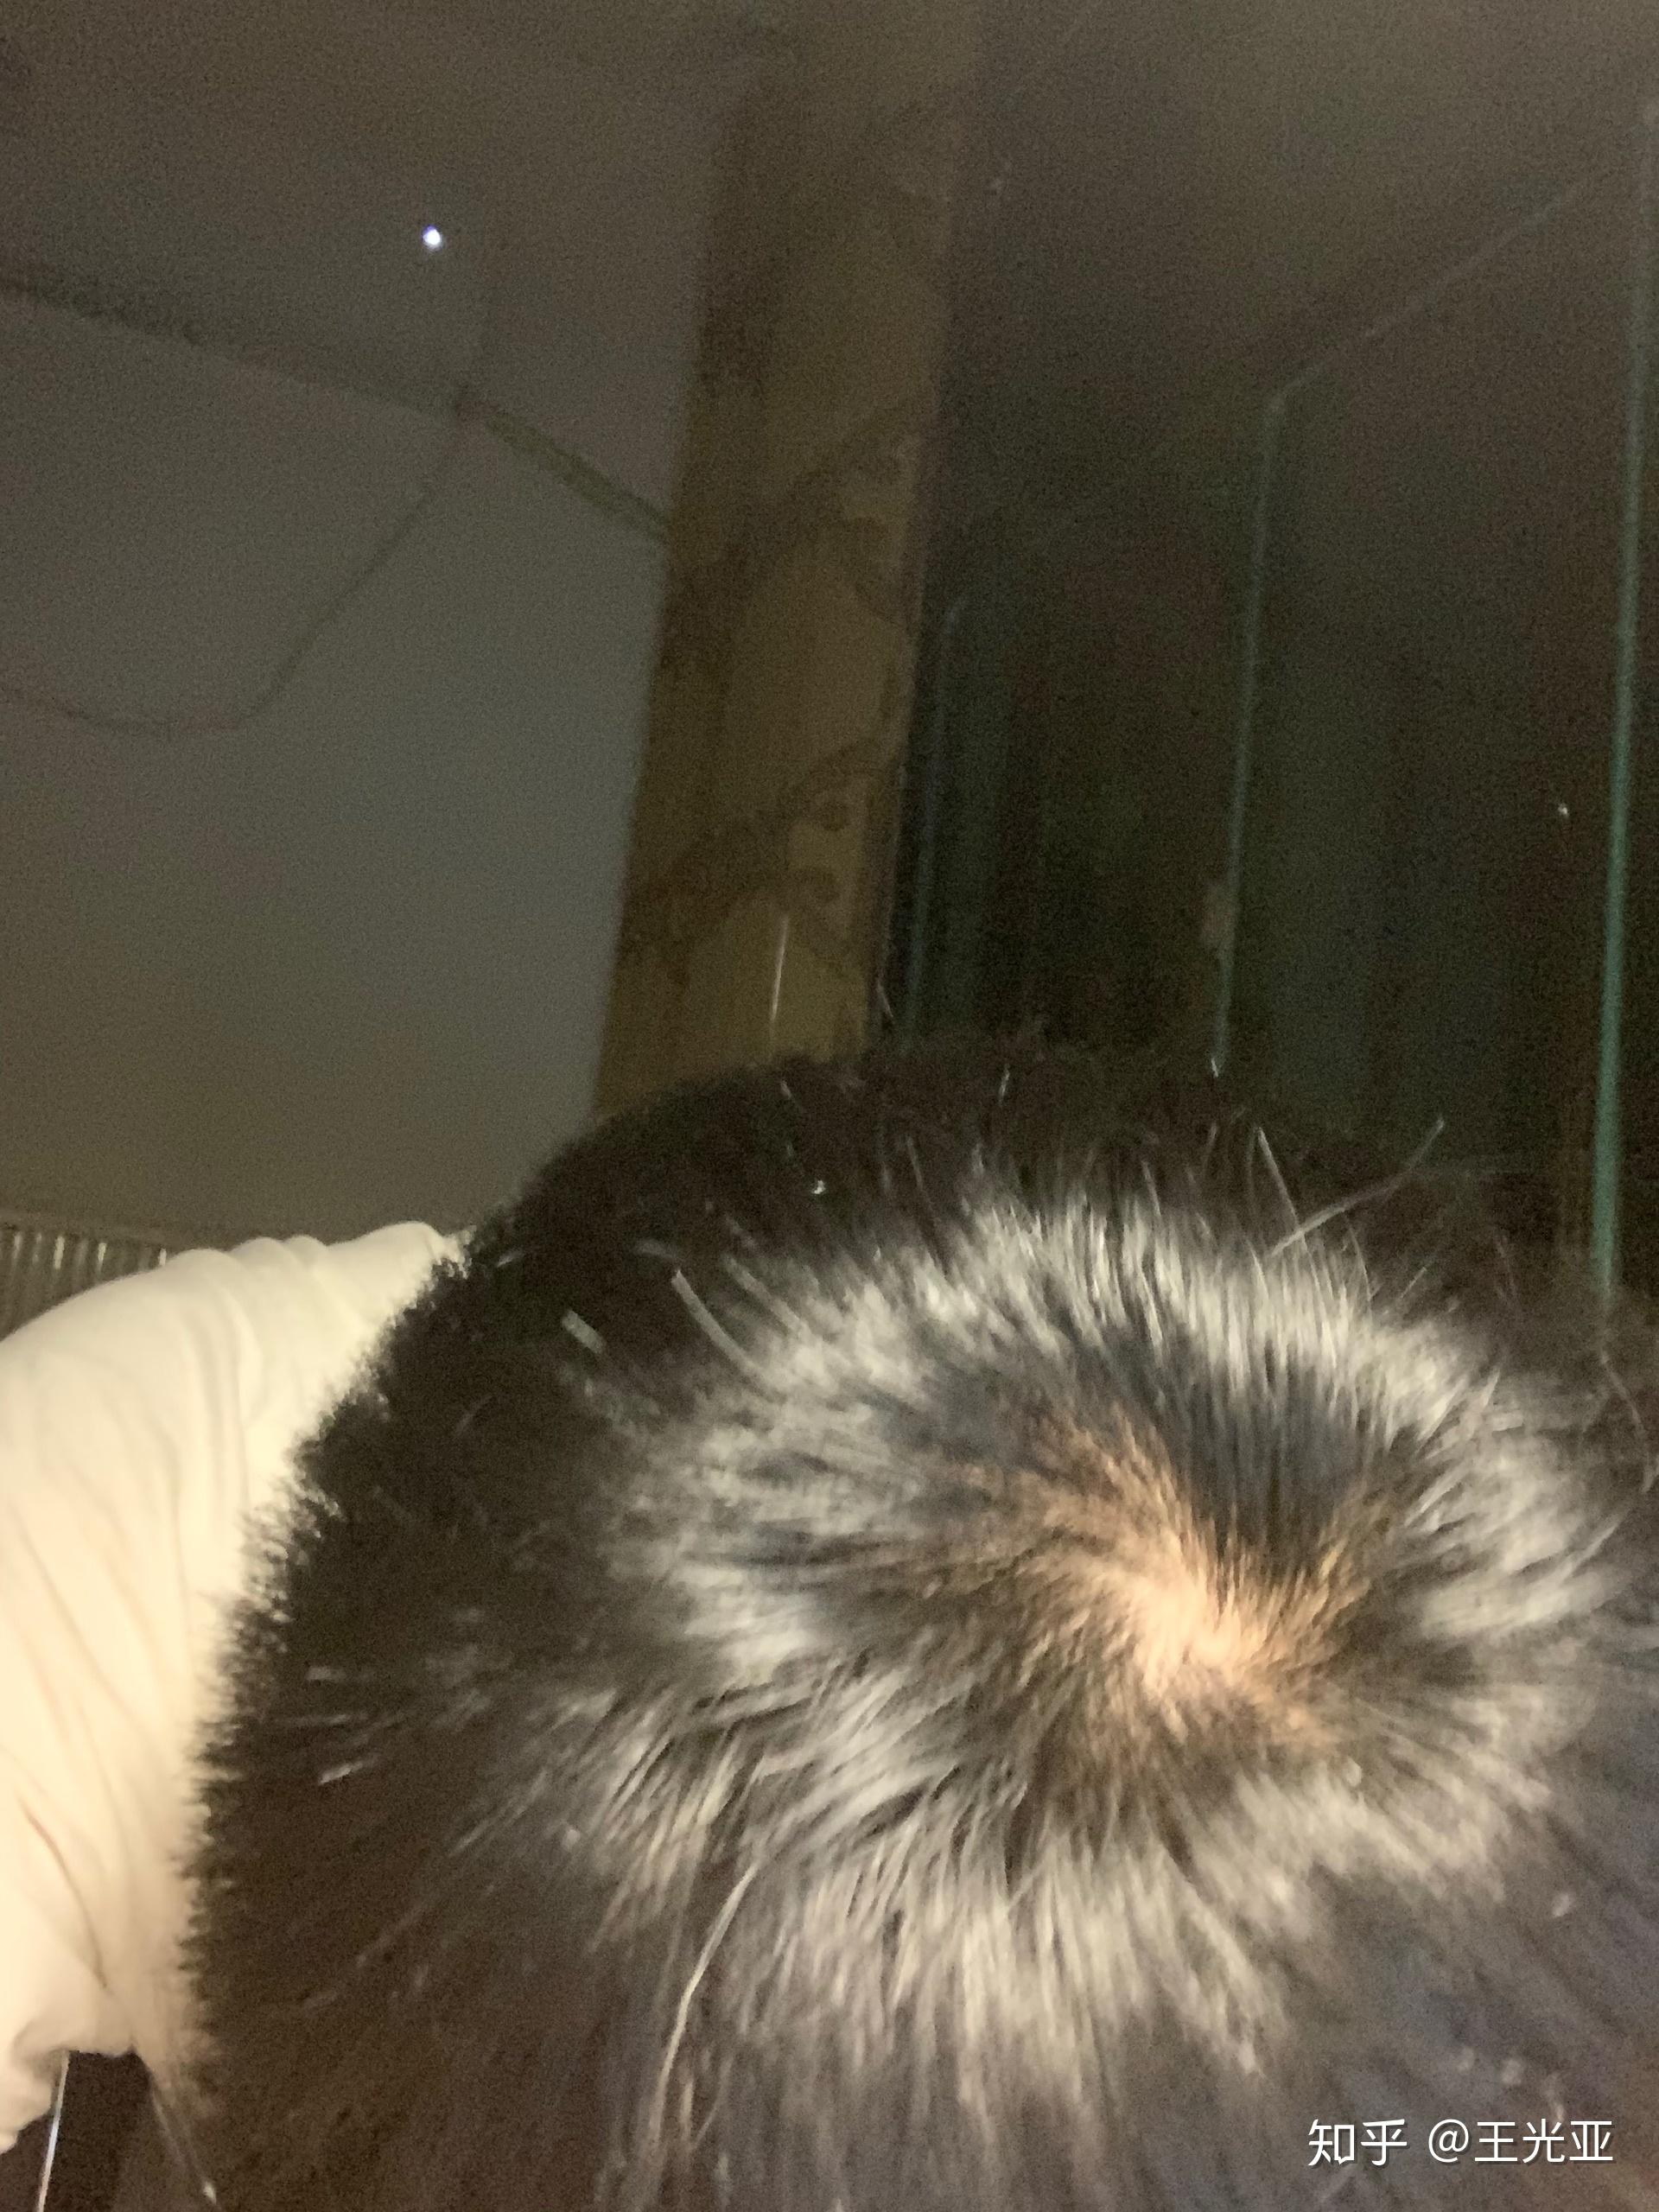 Bald in the middle head and begin no loss hair glabrous of mature Asian ...